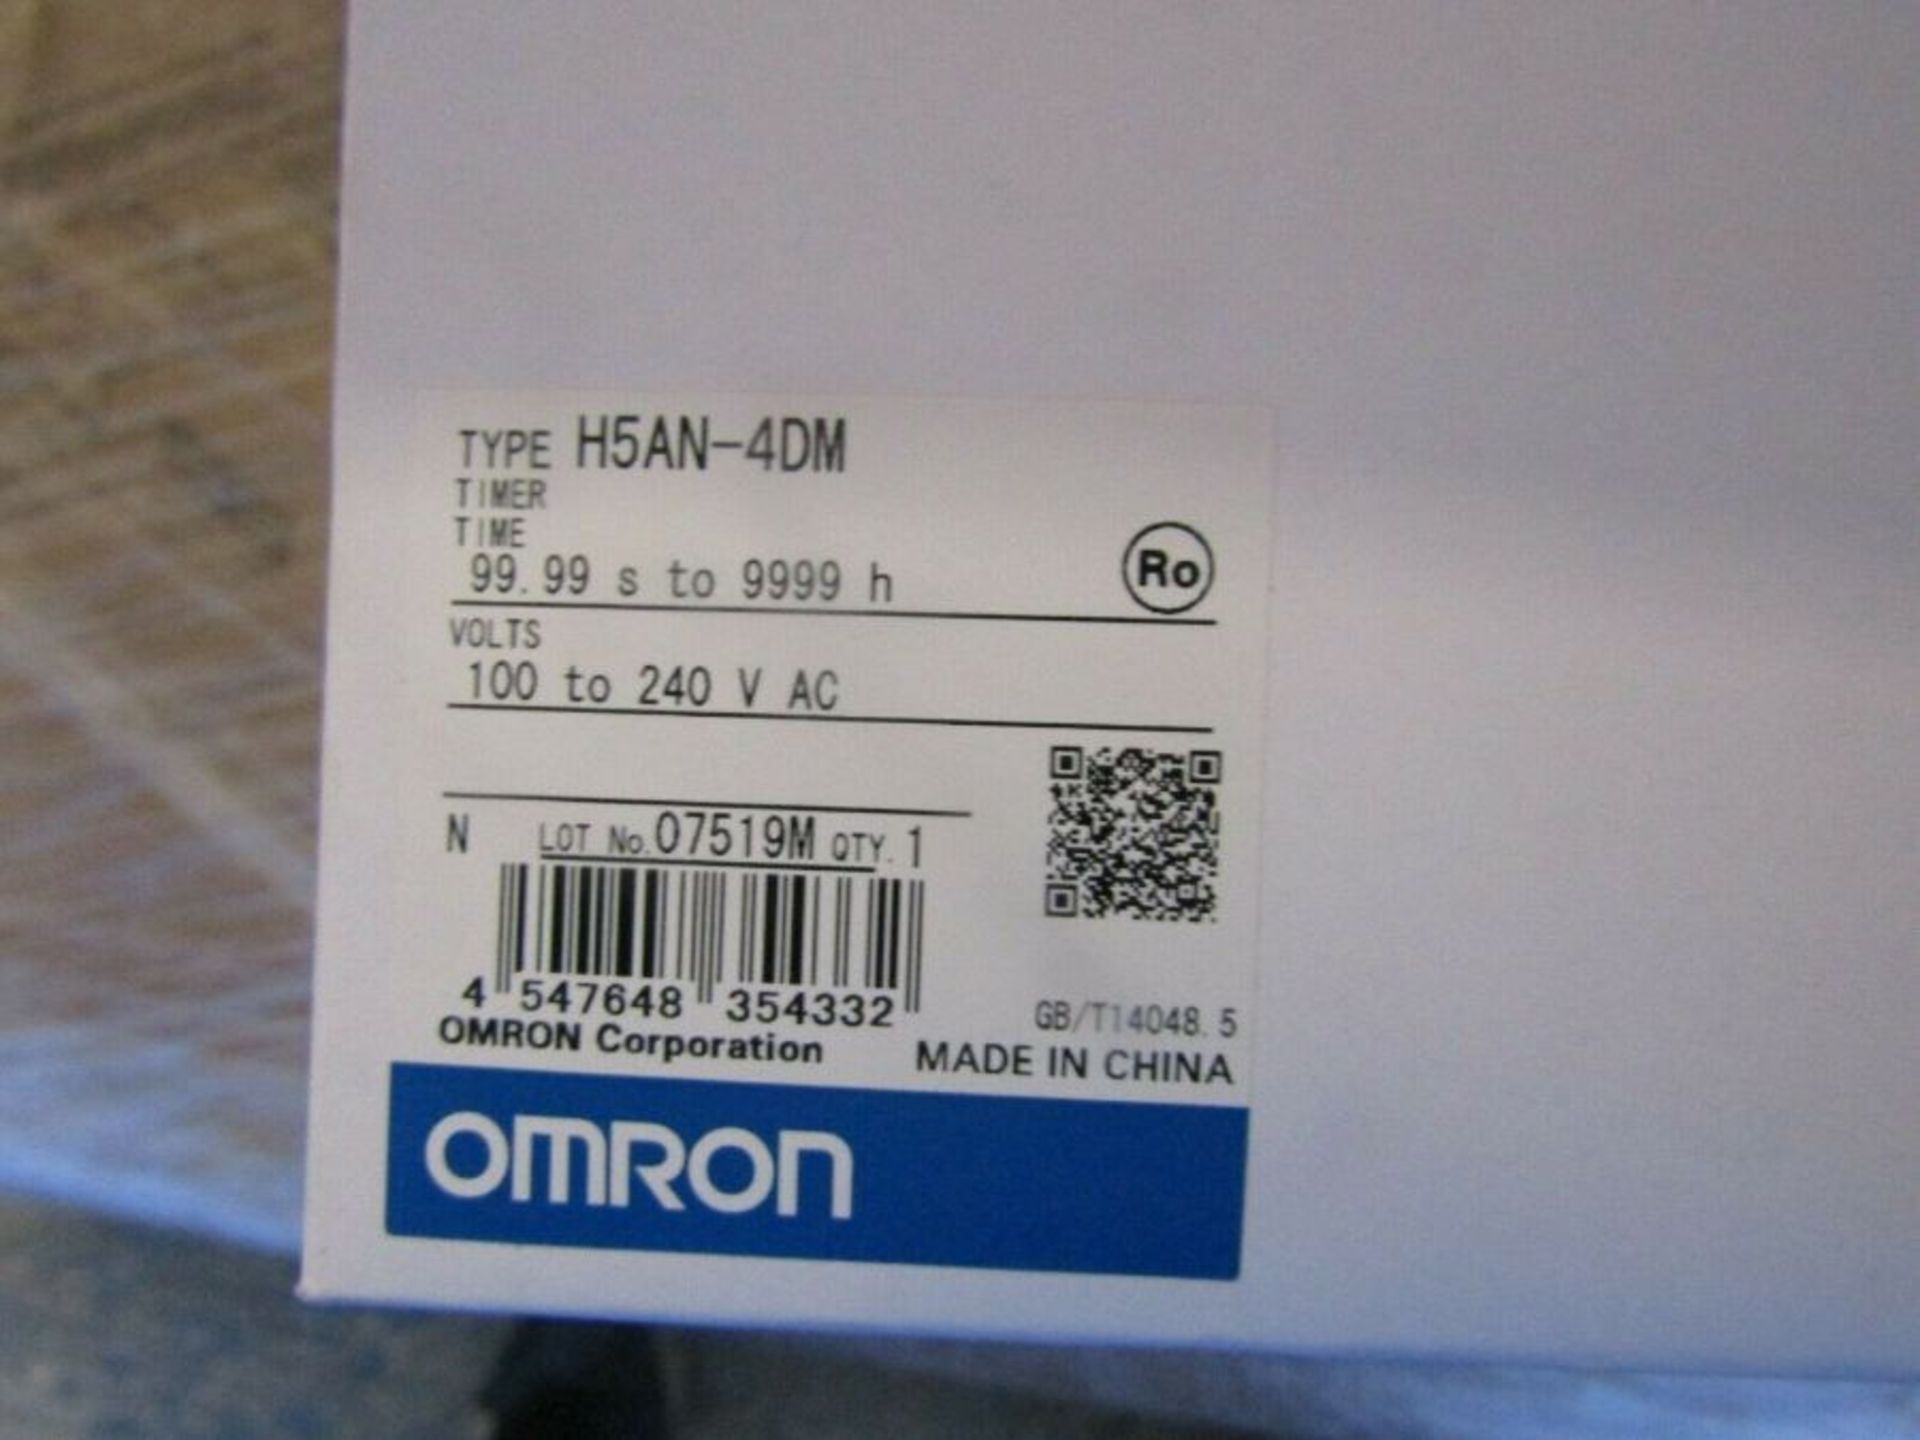 Omron SPDT Multi Function Time Delay Relay, One Shot H5AN - 585 3001770112 - Image 3 of 6